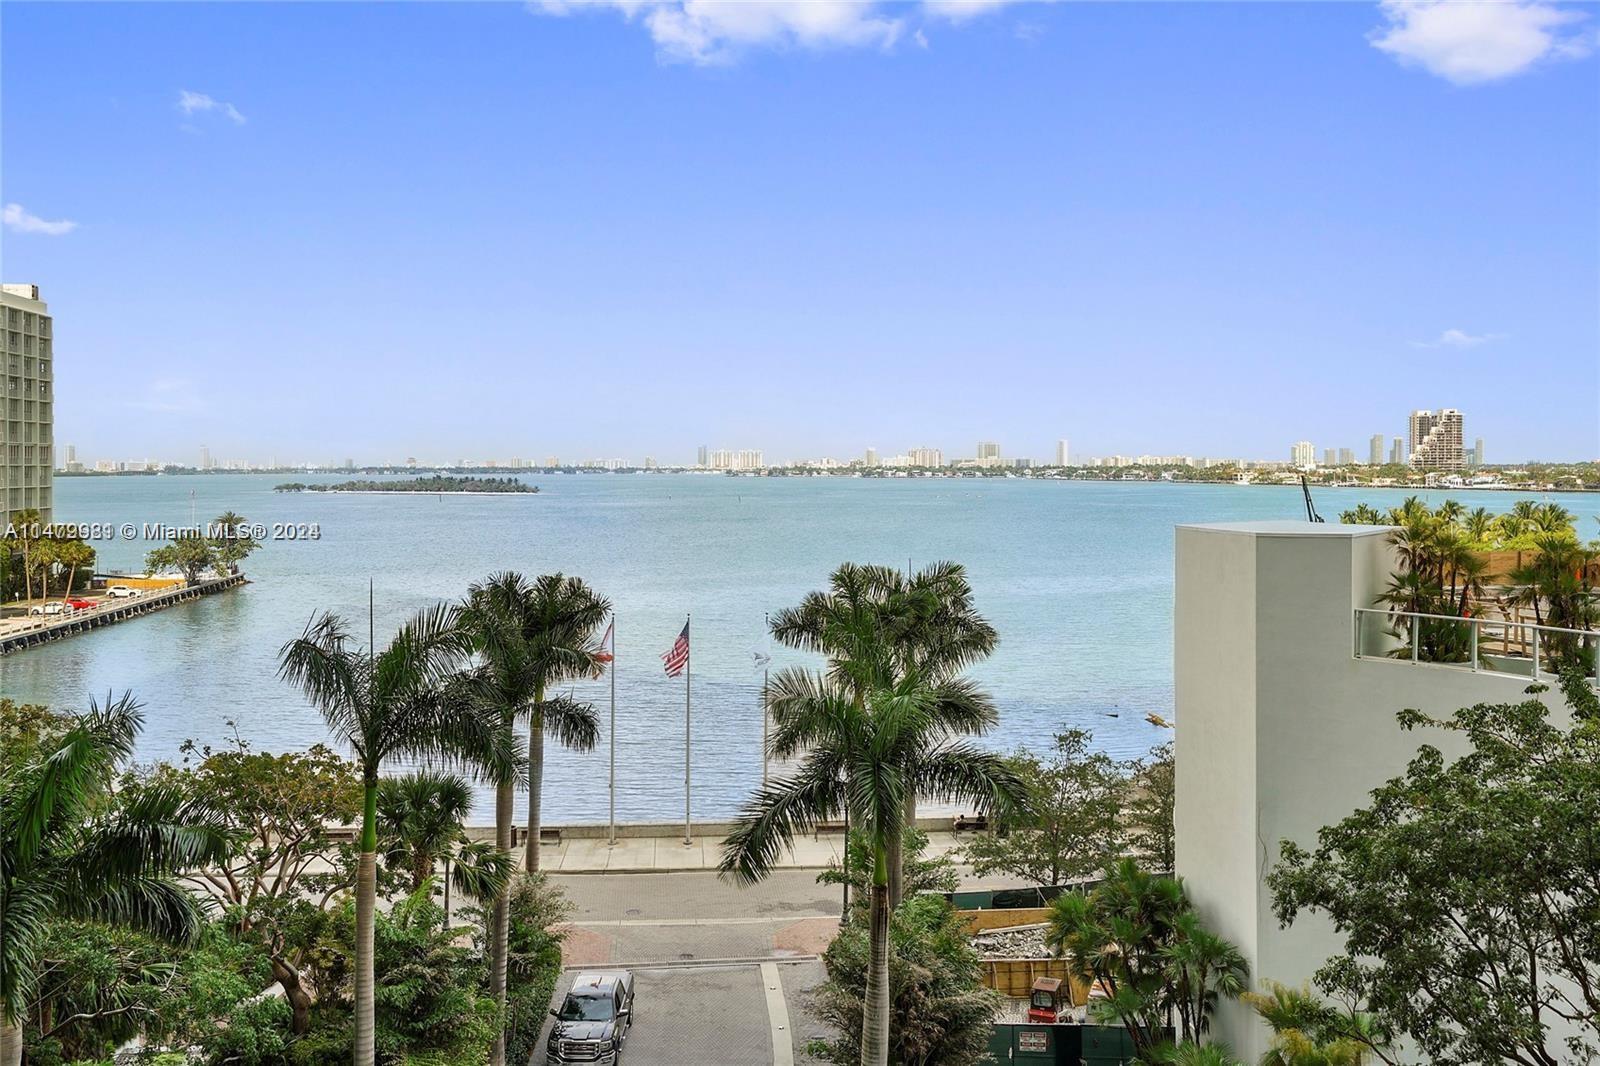 DIRECT BAY VIEW + GARDEN + TERRACE Stunning condo 2 Beds. 2.5 Bathrooms  plus Den convertible in Third Bedroom or Office. White Porcelain Floor. Balcony with 216 Sf. of unobstructed views of Biscayne Bay and Miami Beach skyline. Top of the lines appliances. PRIVATE GARDEN OF 425 Sf. + TERRACE with 108 Sf. in the back to entertain your guests. The price includes TWO PARKING SPACES & ONE STORAGE. Direct elevator into the unit plus two more elevators. SAME FLOOR POOL &  Barbecue Area. Building amenities represent the epitome of refined good taste and sophistication: Concierge, Pool, Gym with bay view, Spa, Child Play Area, Valet and much more...!